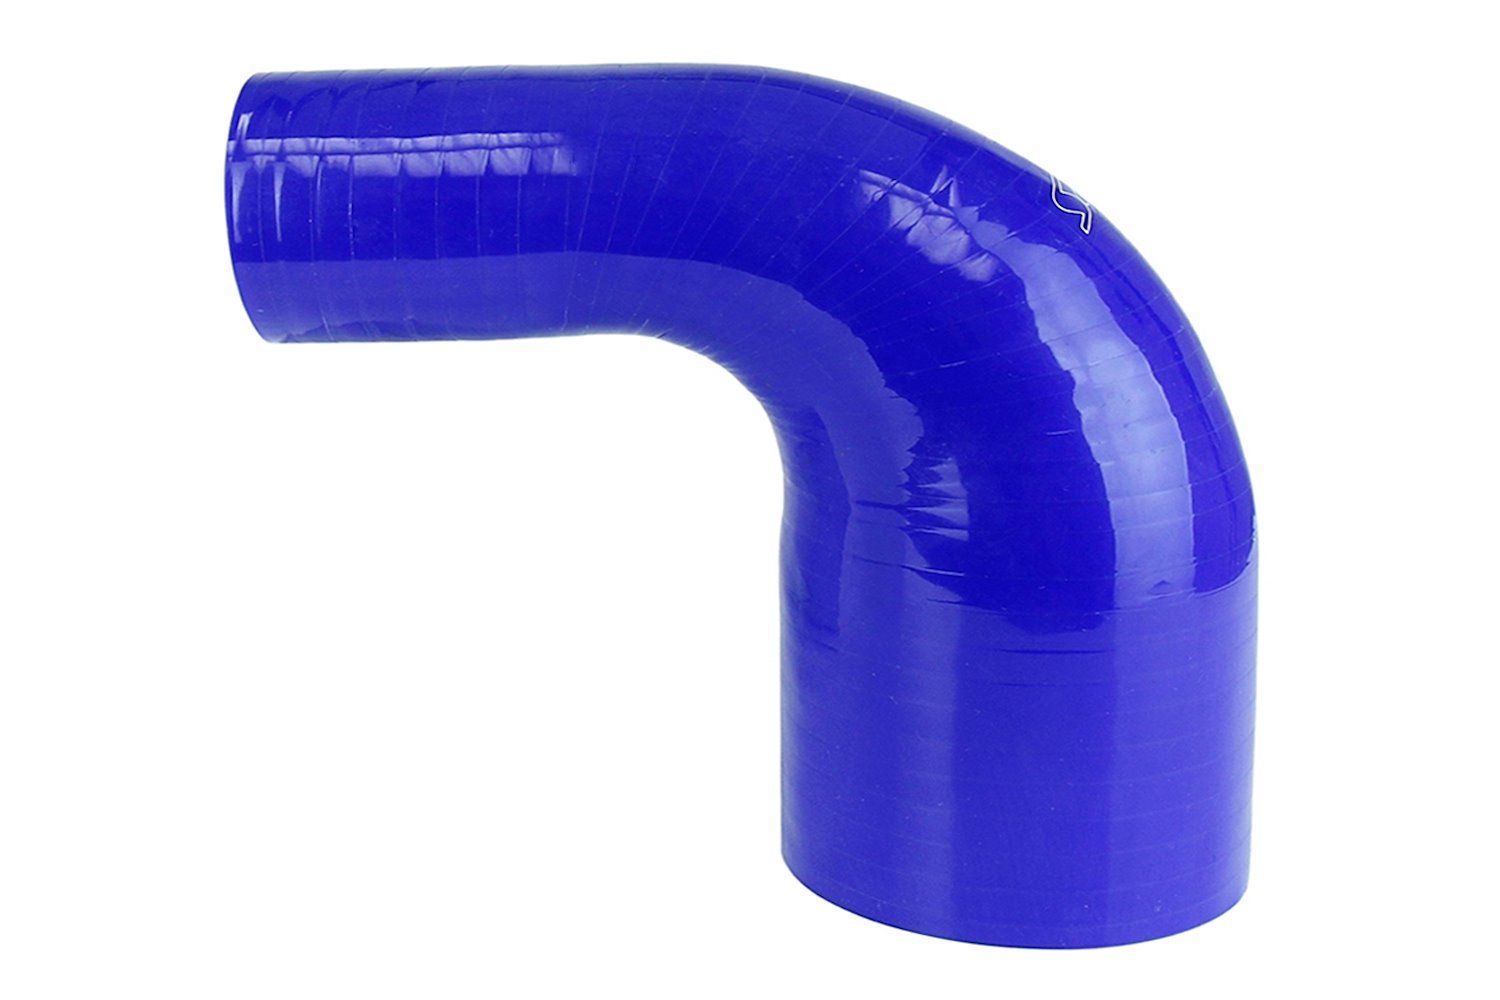 HTSER90-400-425-BLUE Silicone 90-Degree Elbow Hose, High-Temp 4-Ply Reinforced, 4 in. - 4-1/4 in. ID, Blue